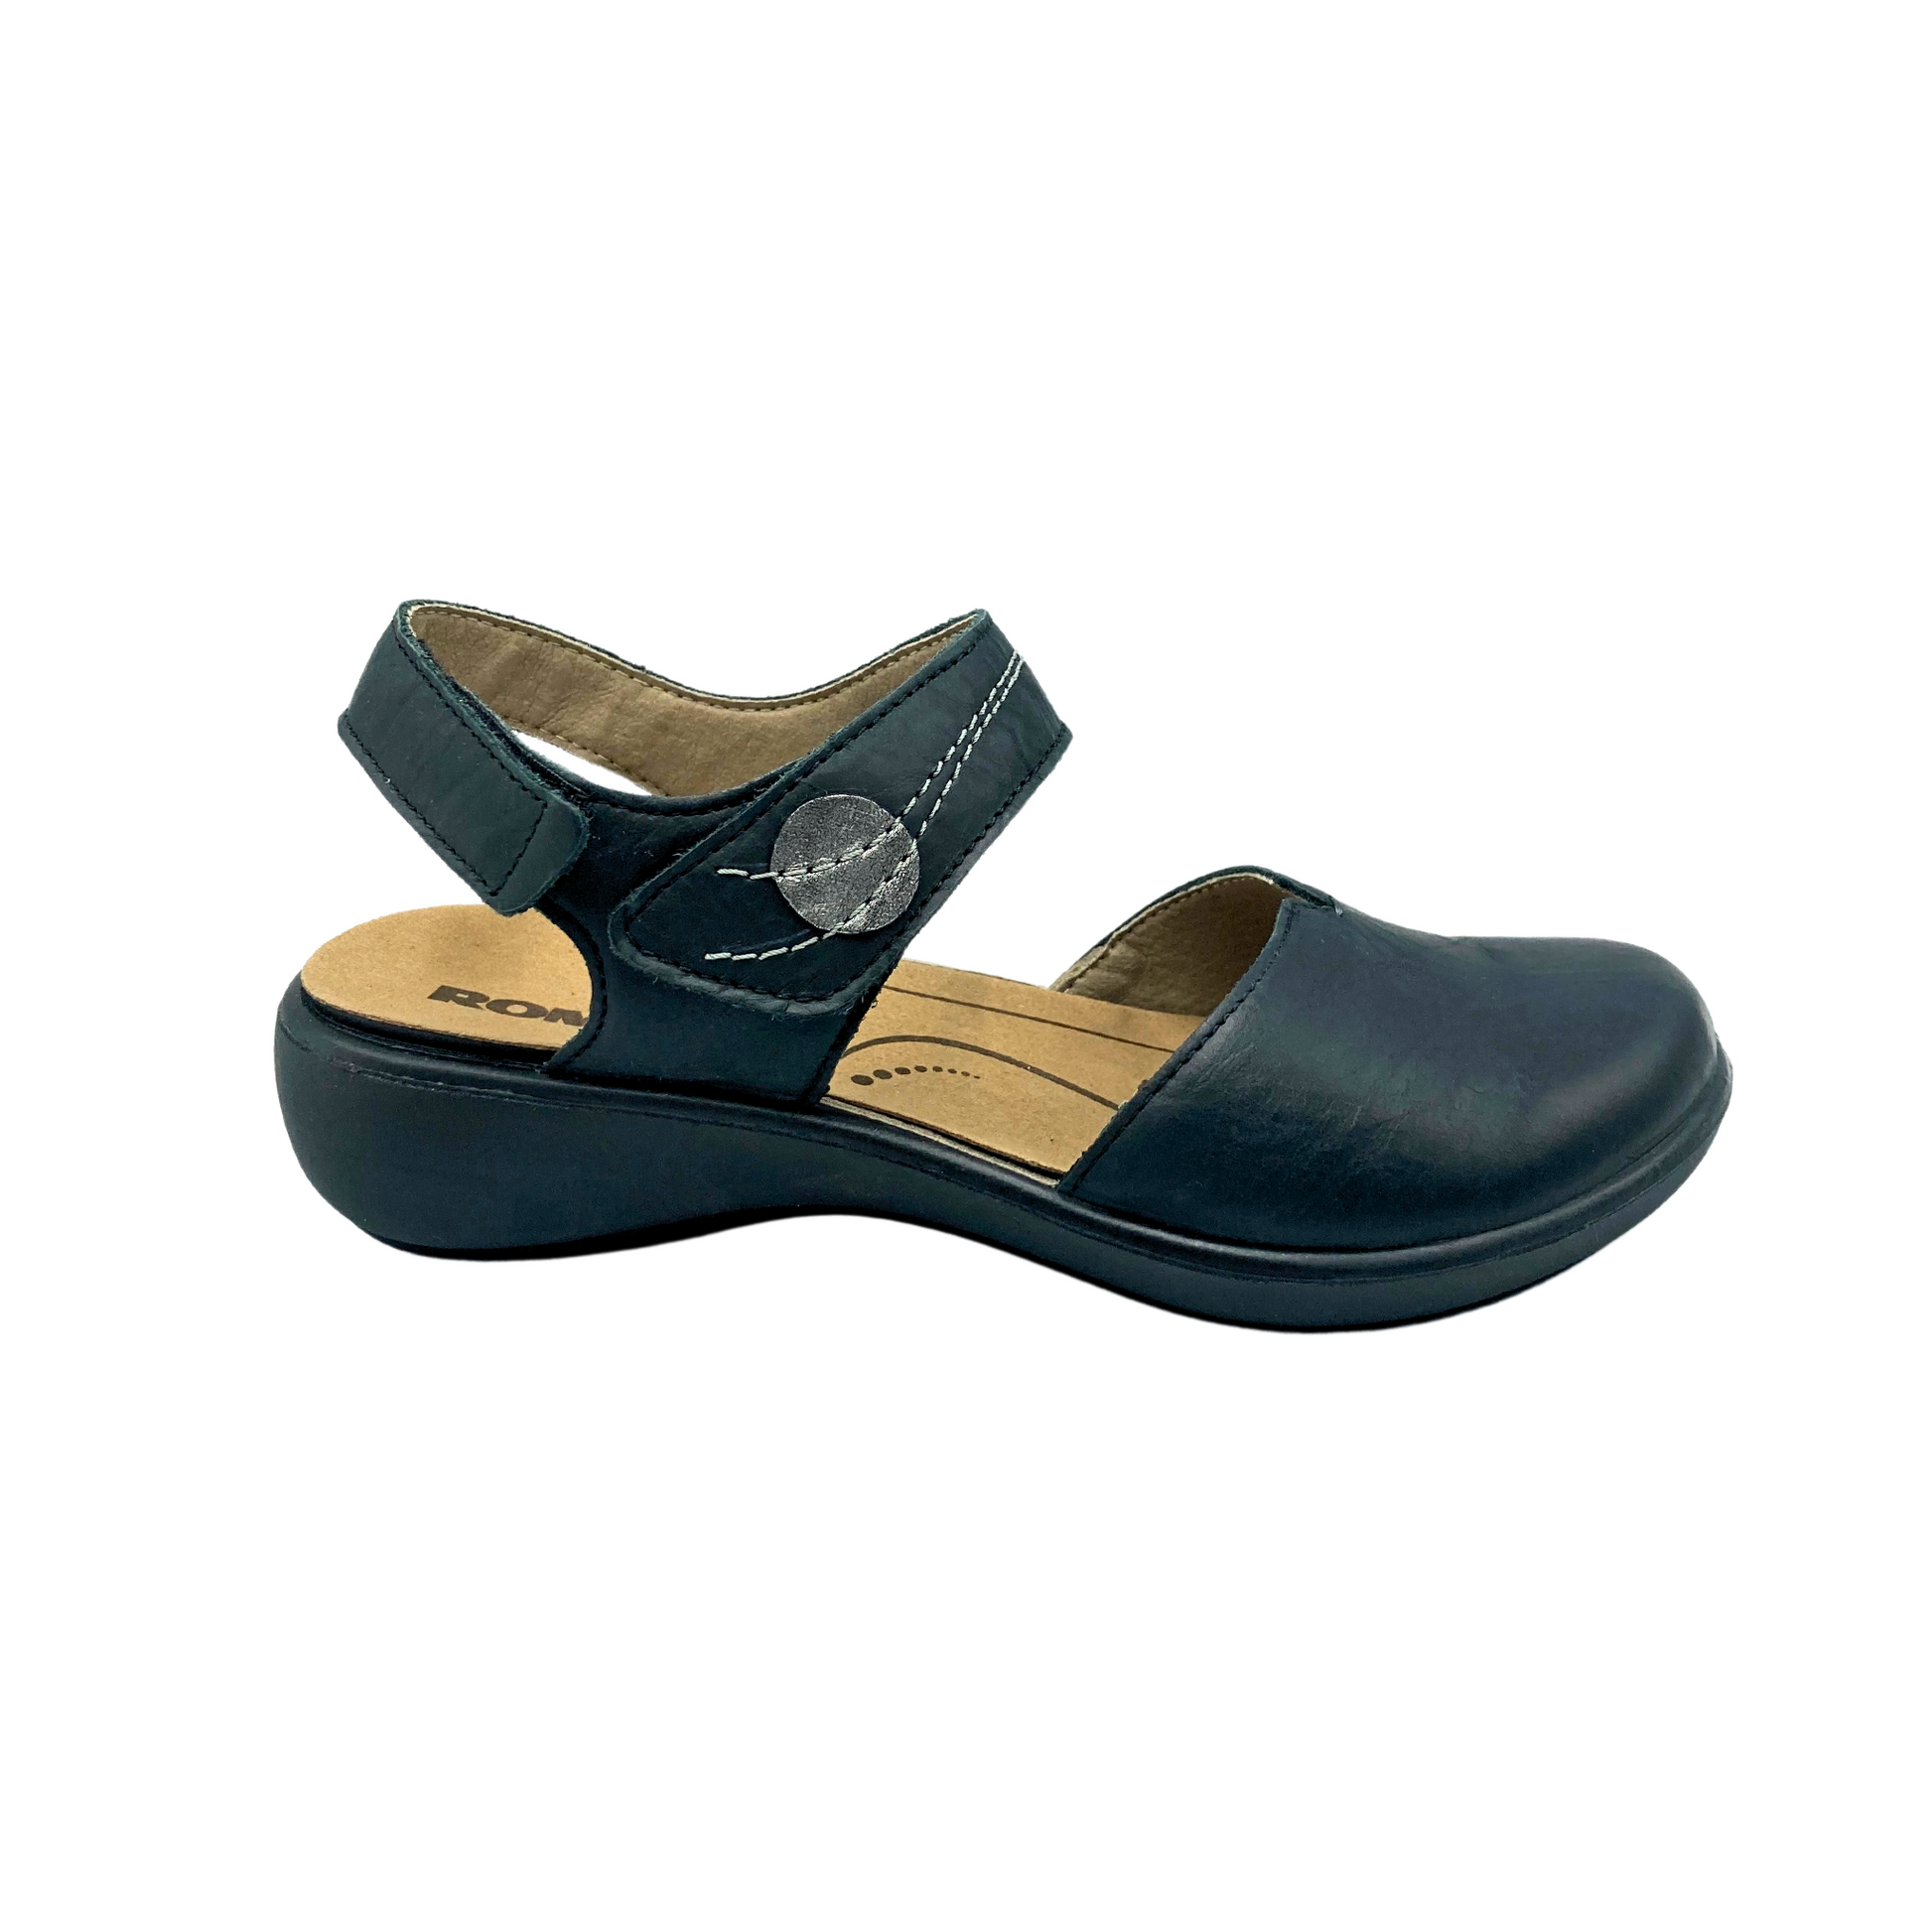 Outside view of a black leather sandal with a closed toe and open heel.  Adjust at both the heel strap and cross strap